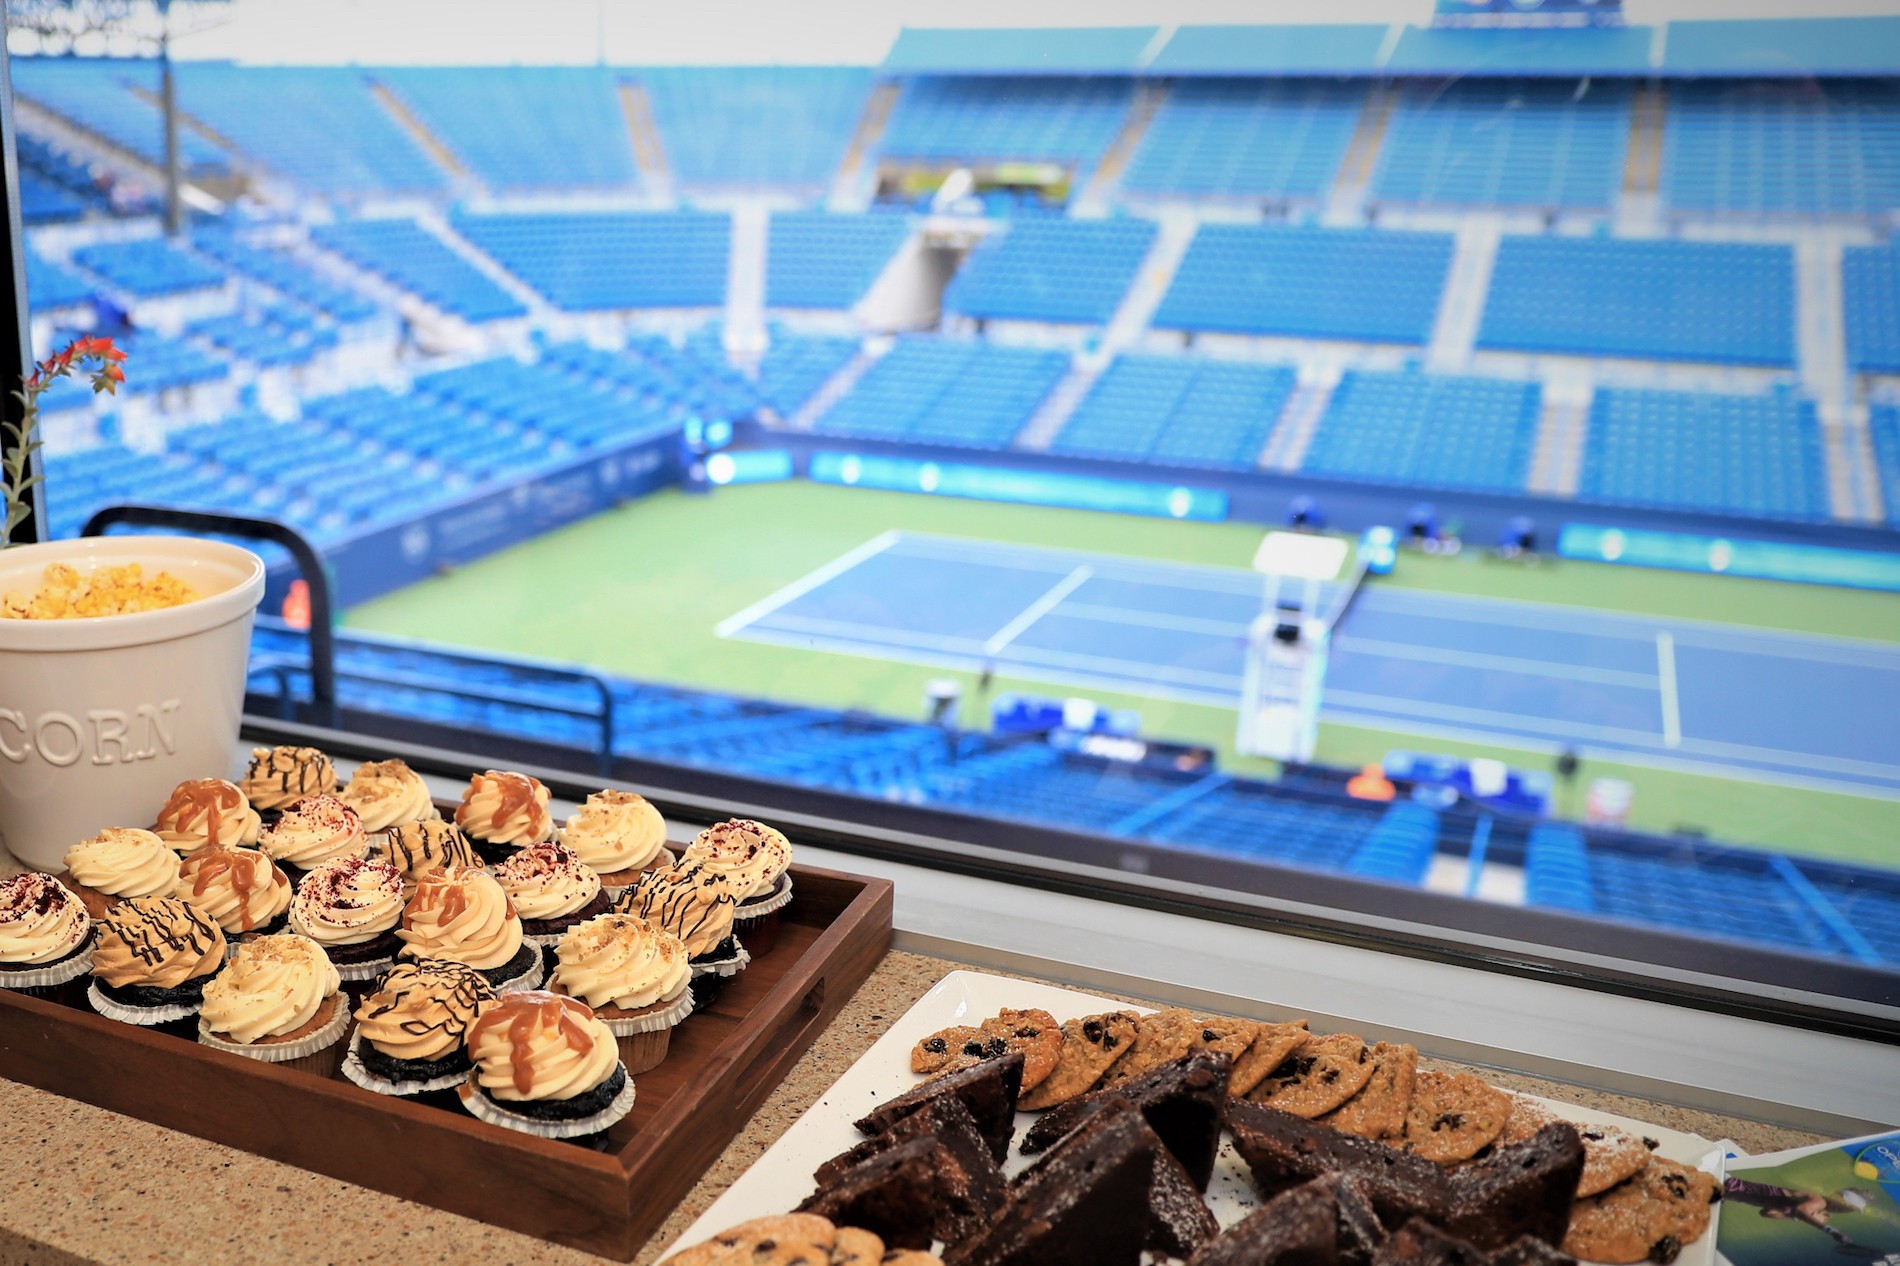 view of stadium from suite with desserts on display